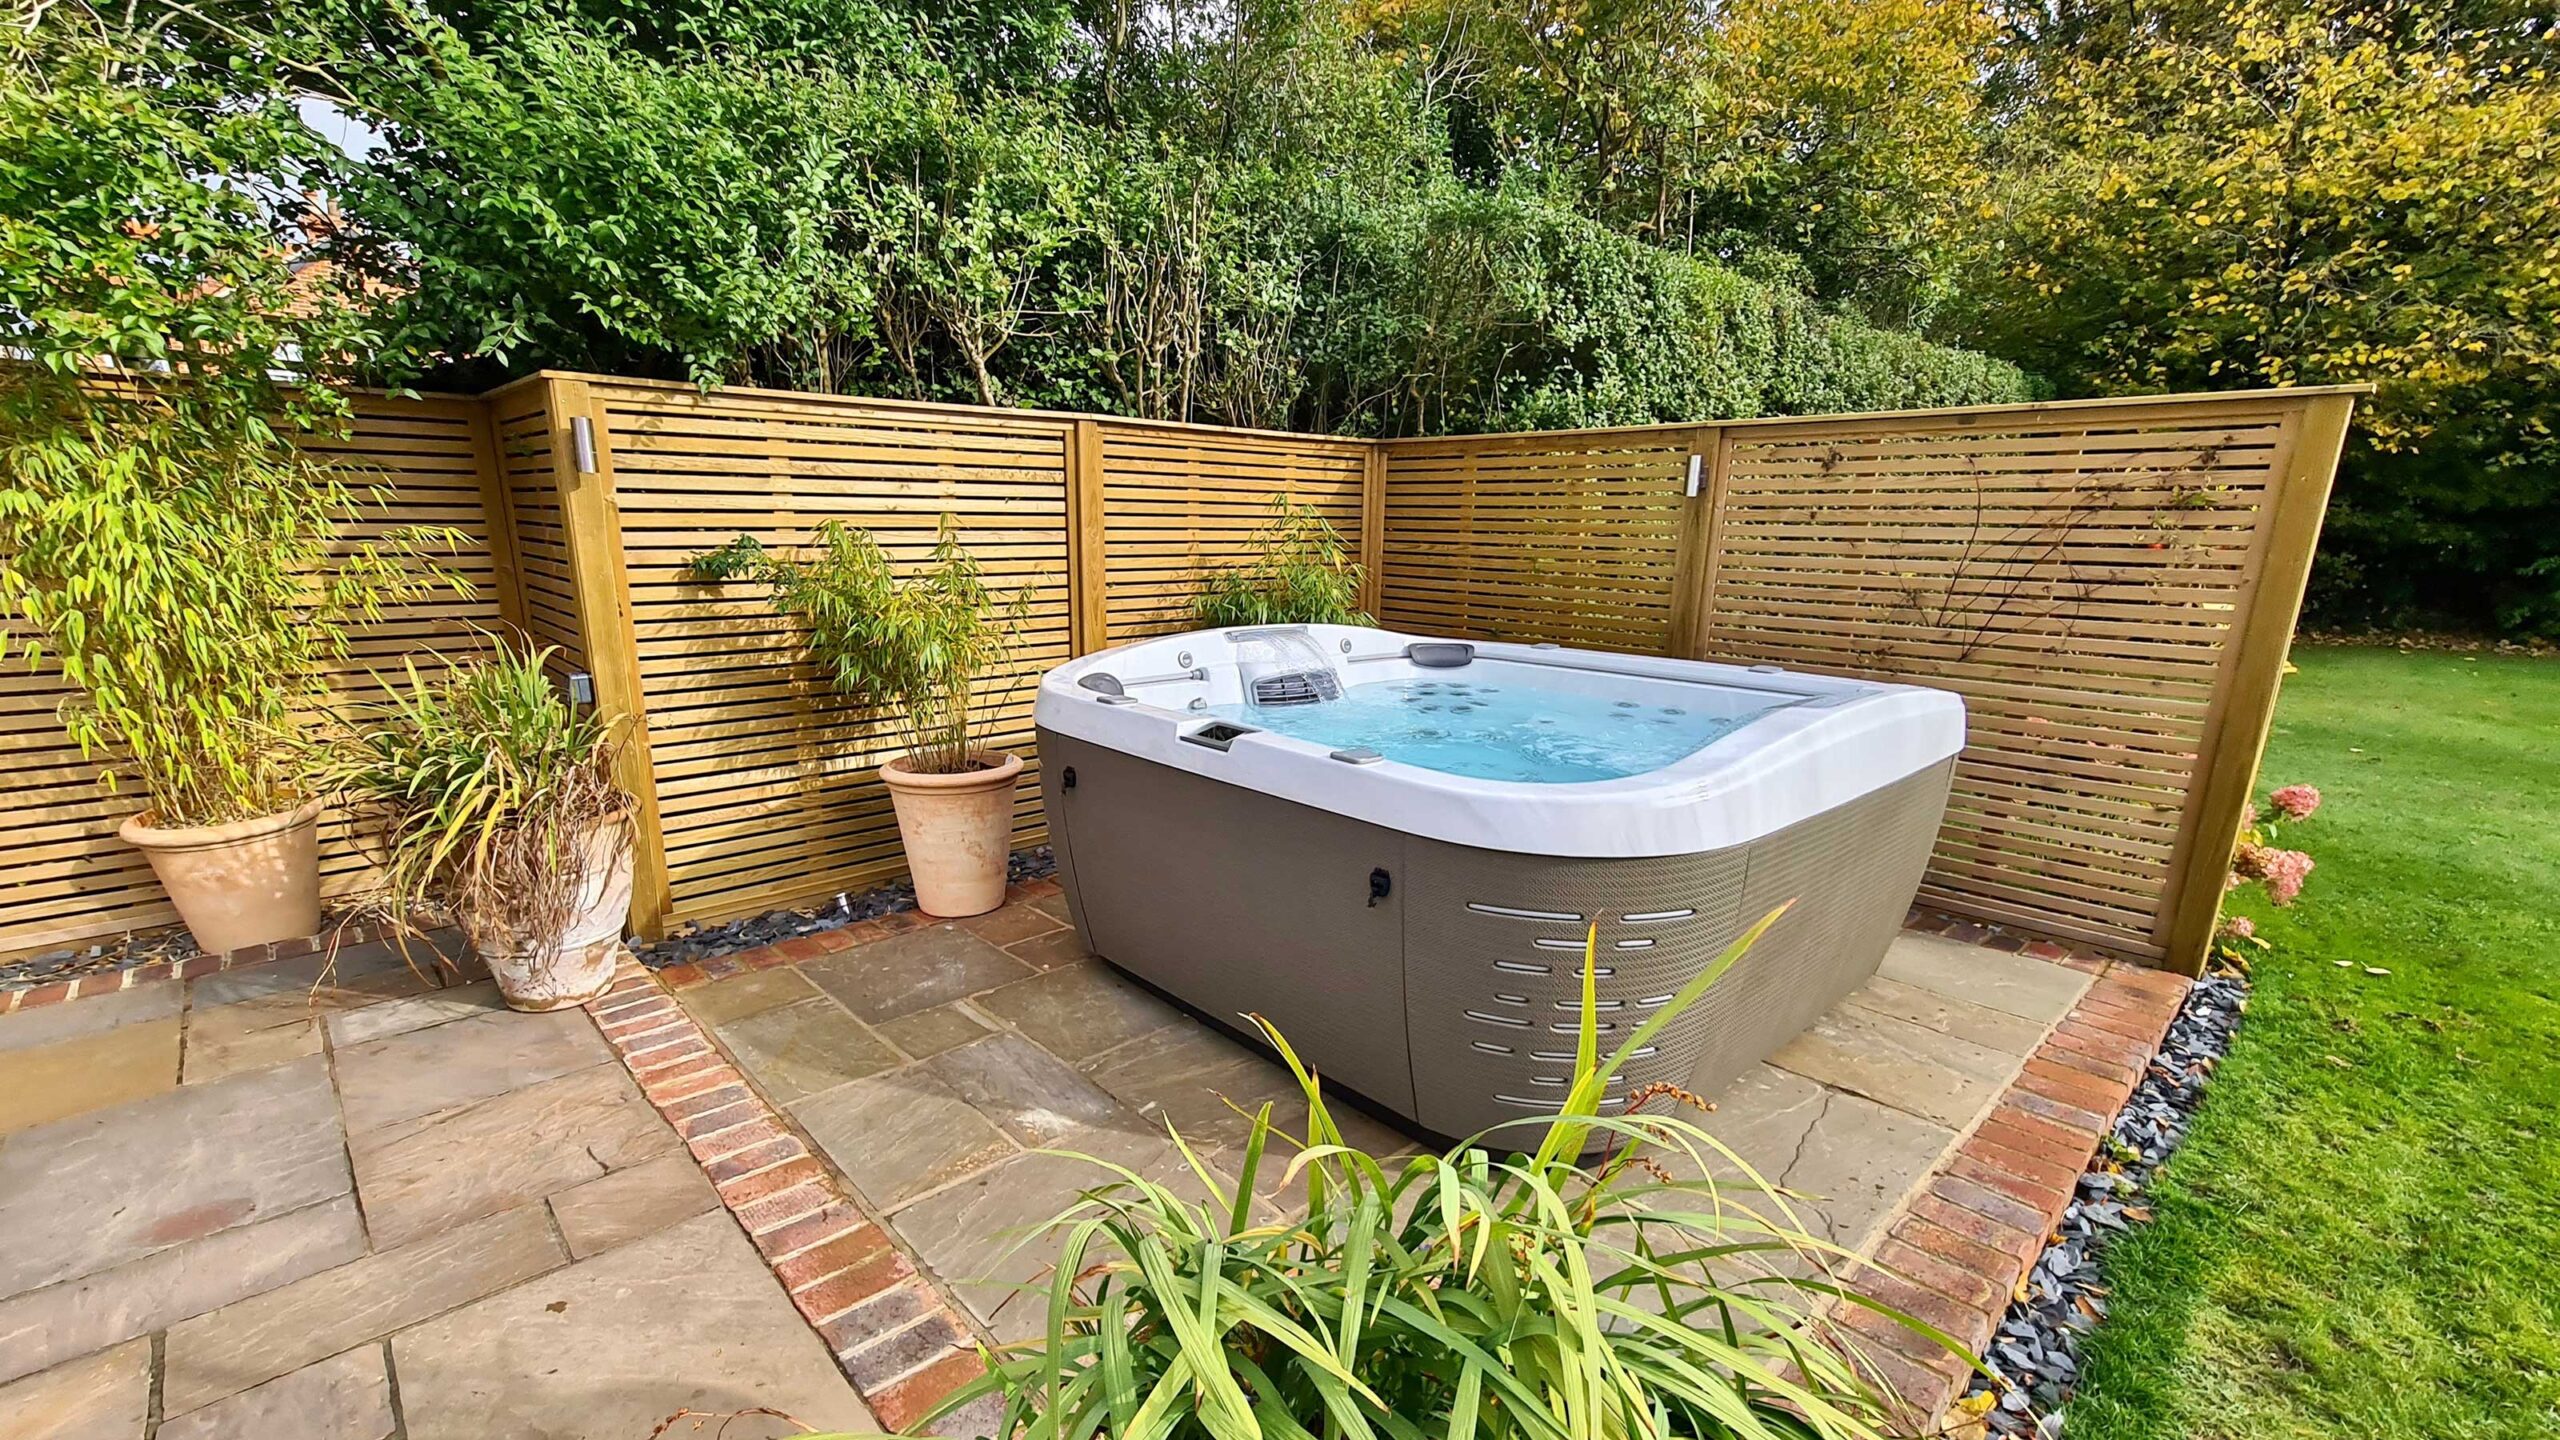 Tips and Tricks for Maintaining Your Jacuzzi Garden